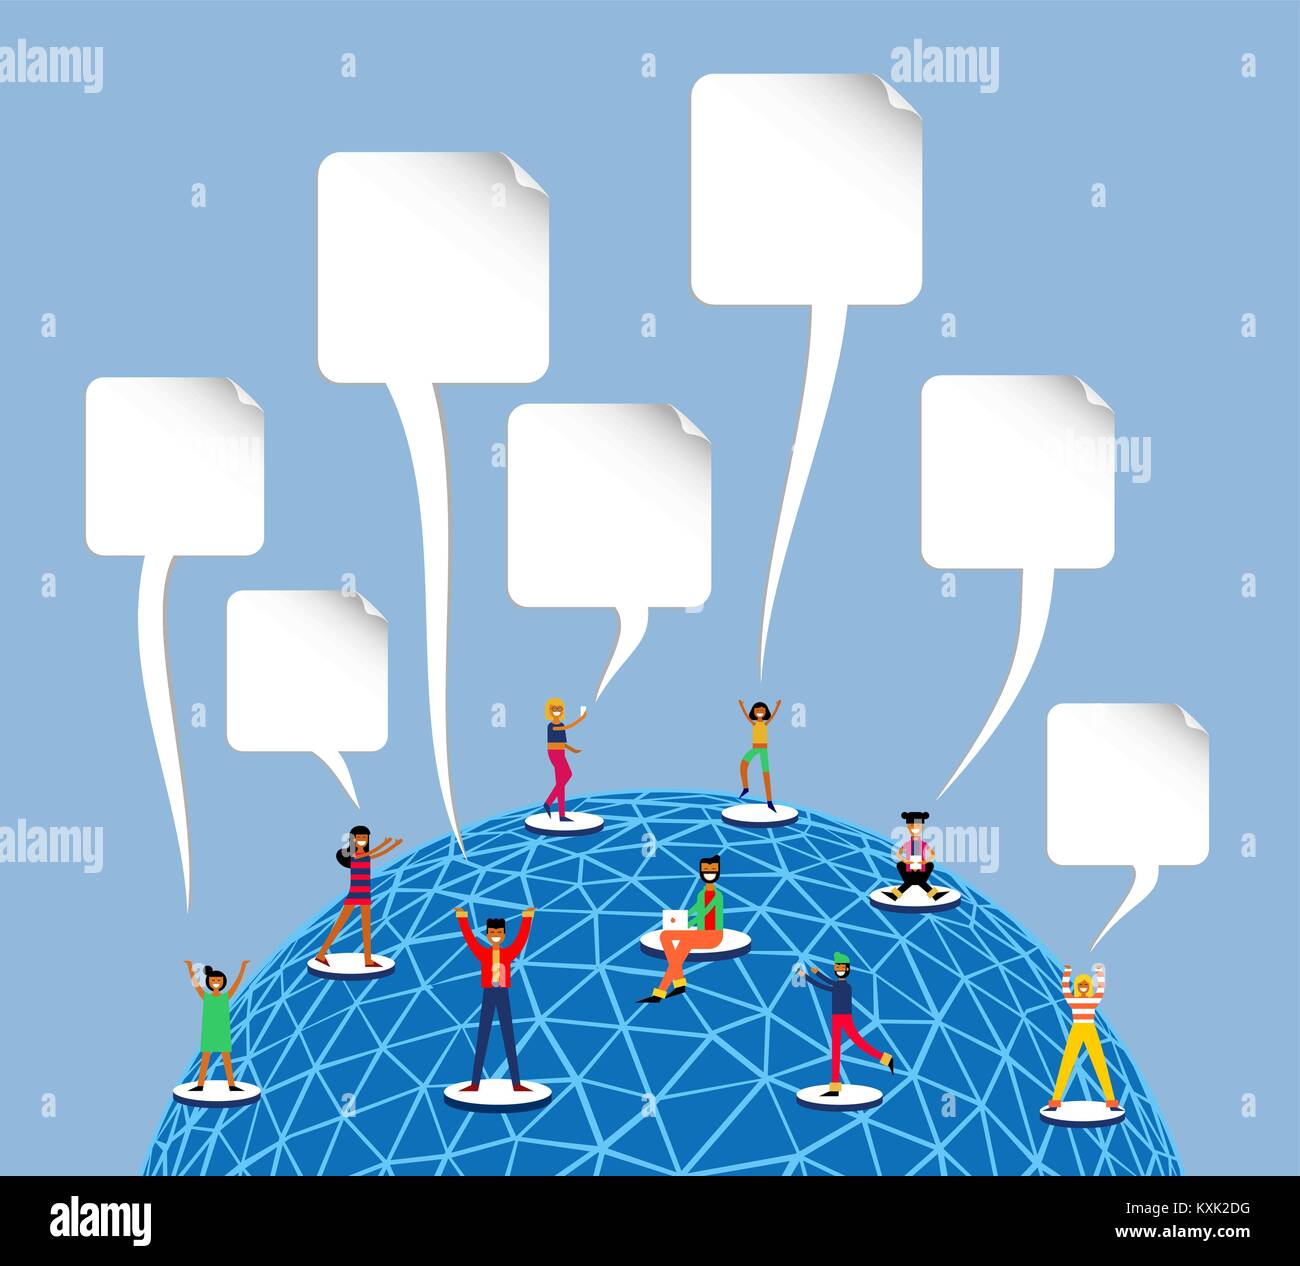 People connected to social media network around the world, worldwide internet access concept illustration in modern flat art style. Includes empty pap Stock Vector